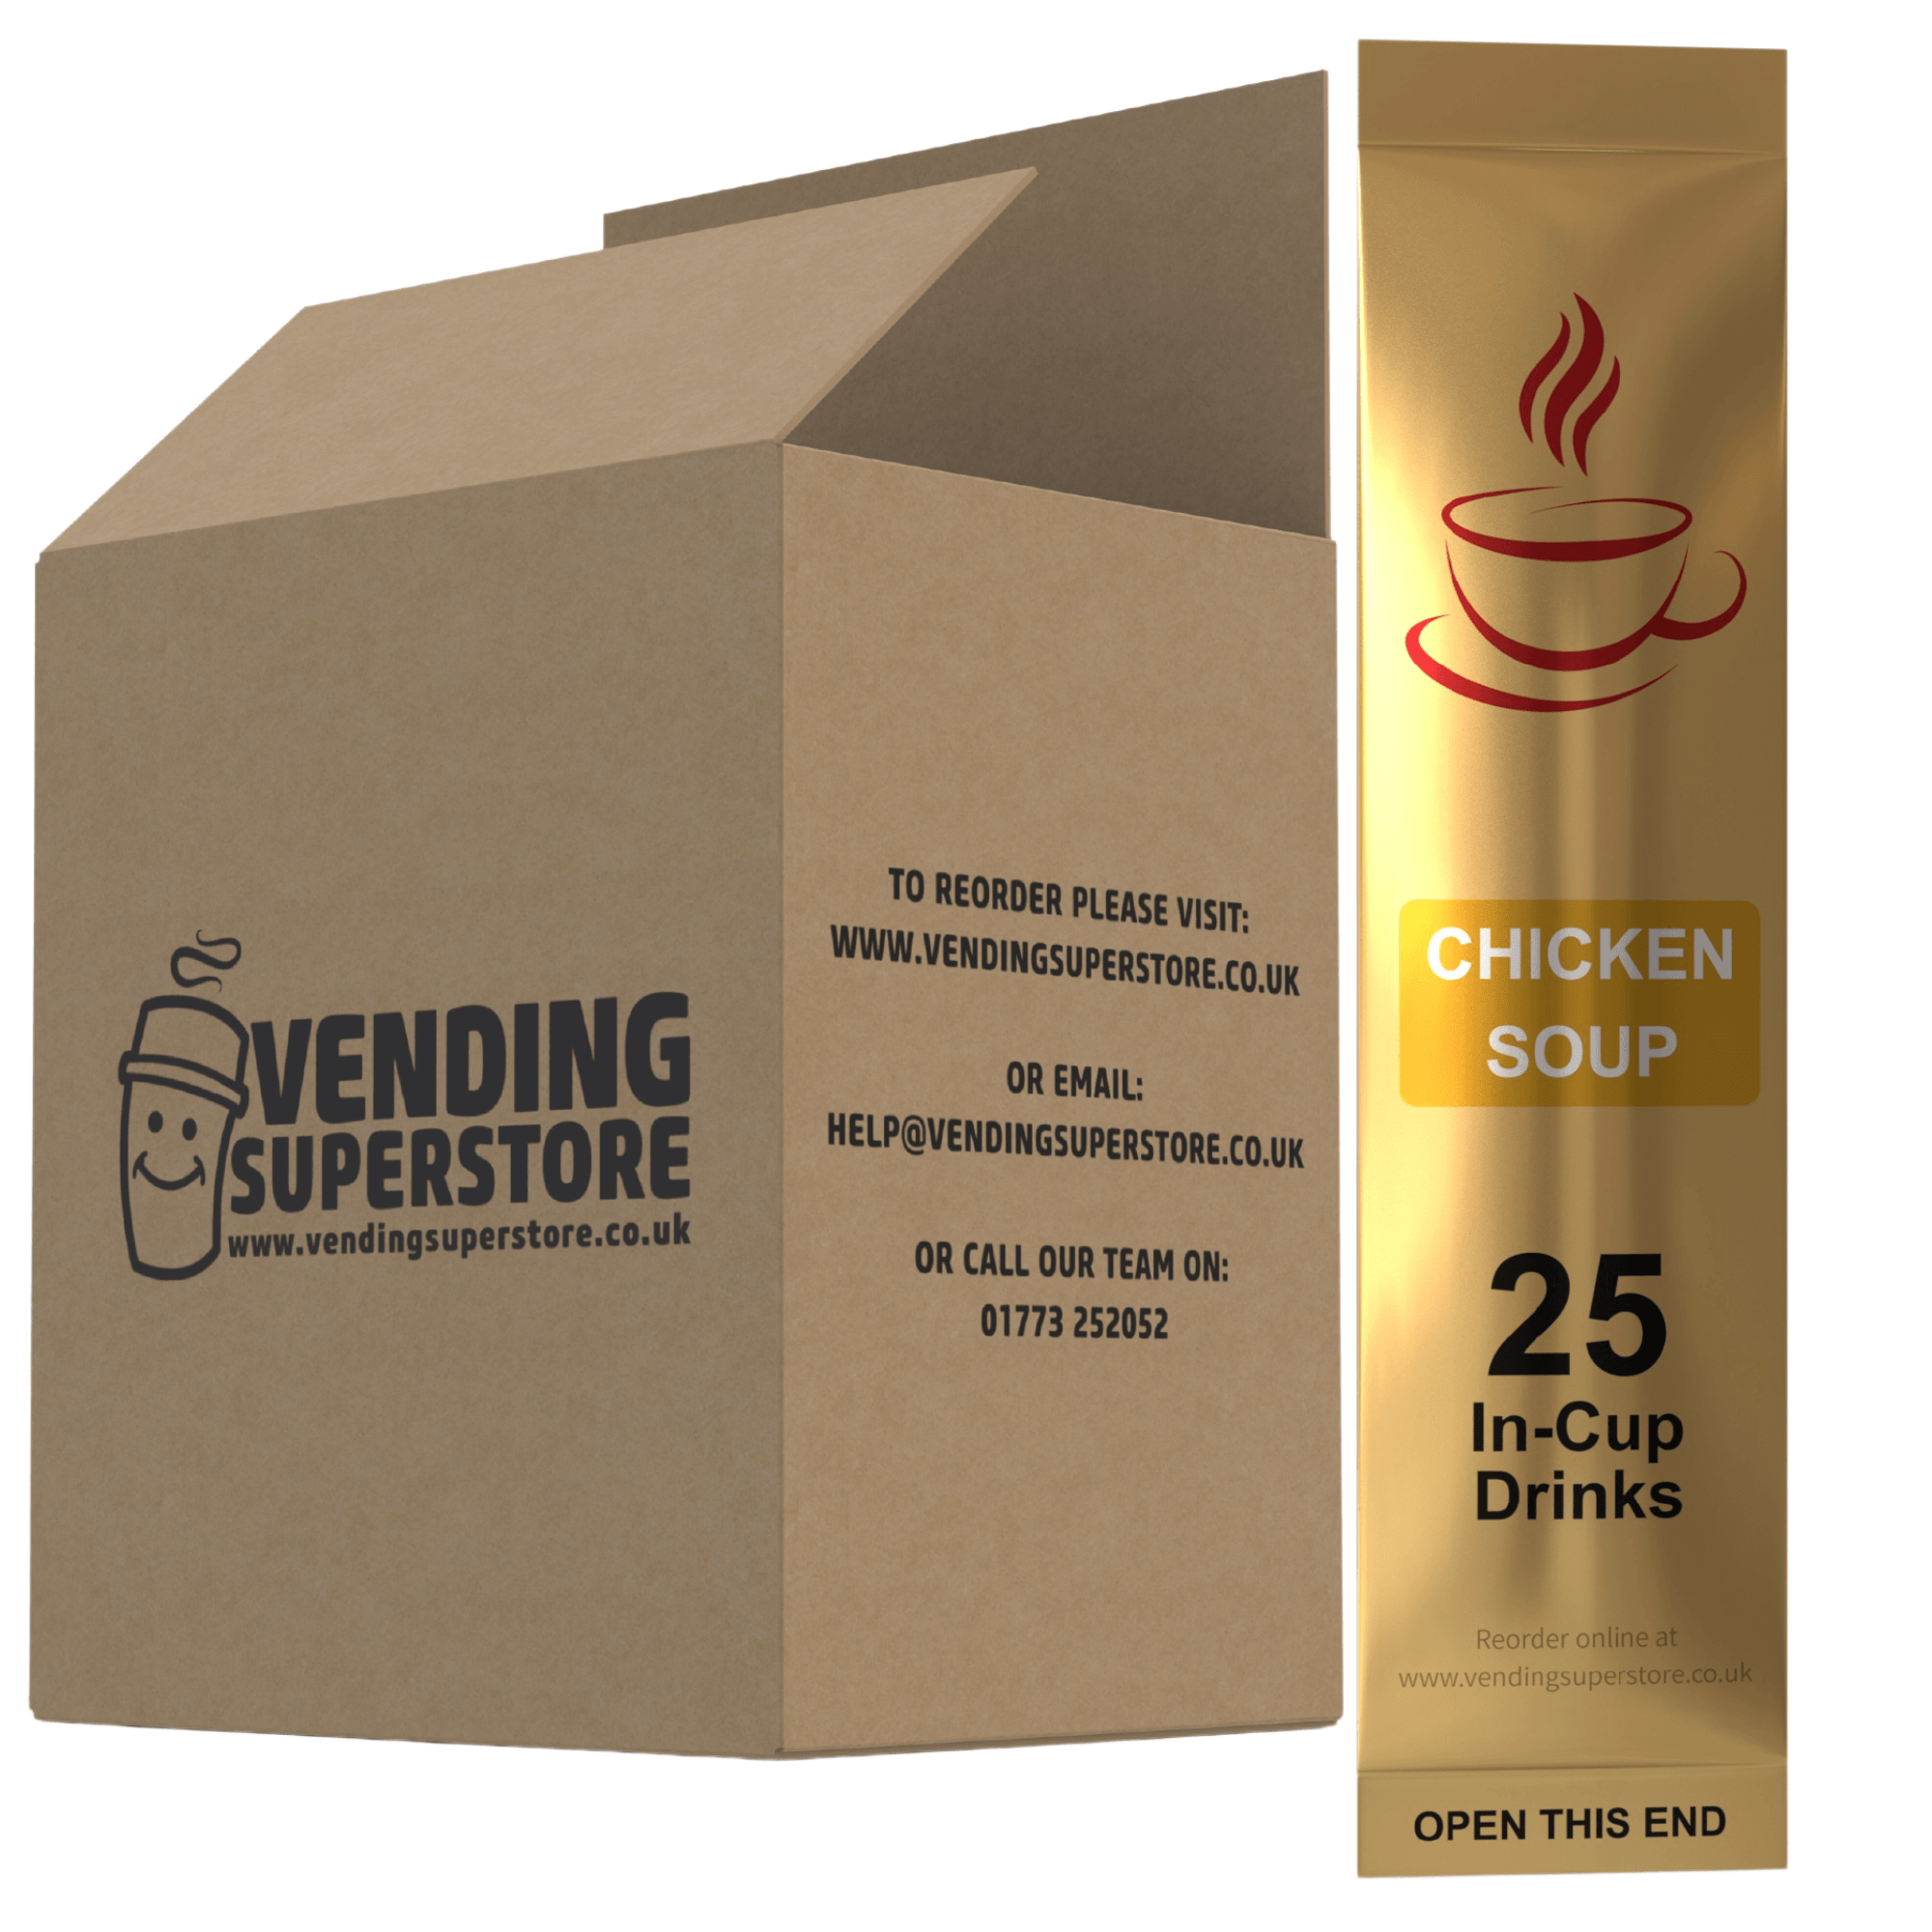 Incup Vending Drinks - Chicken Soup - Half Case (6 x 25) - Vending Superstore